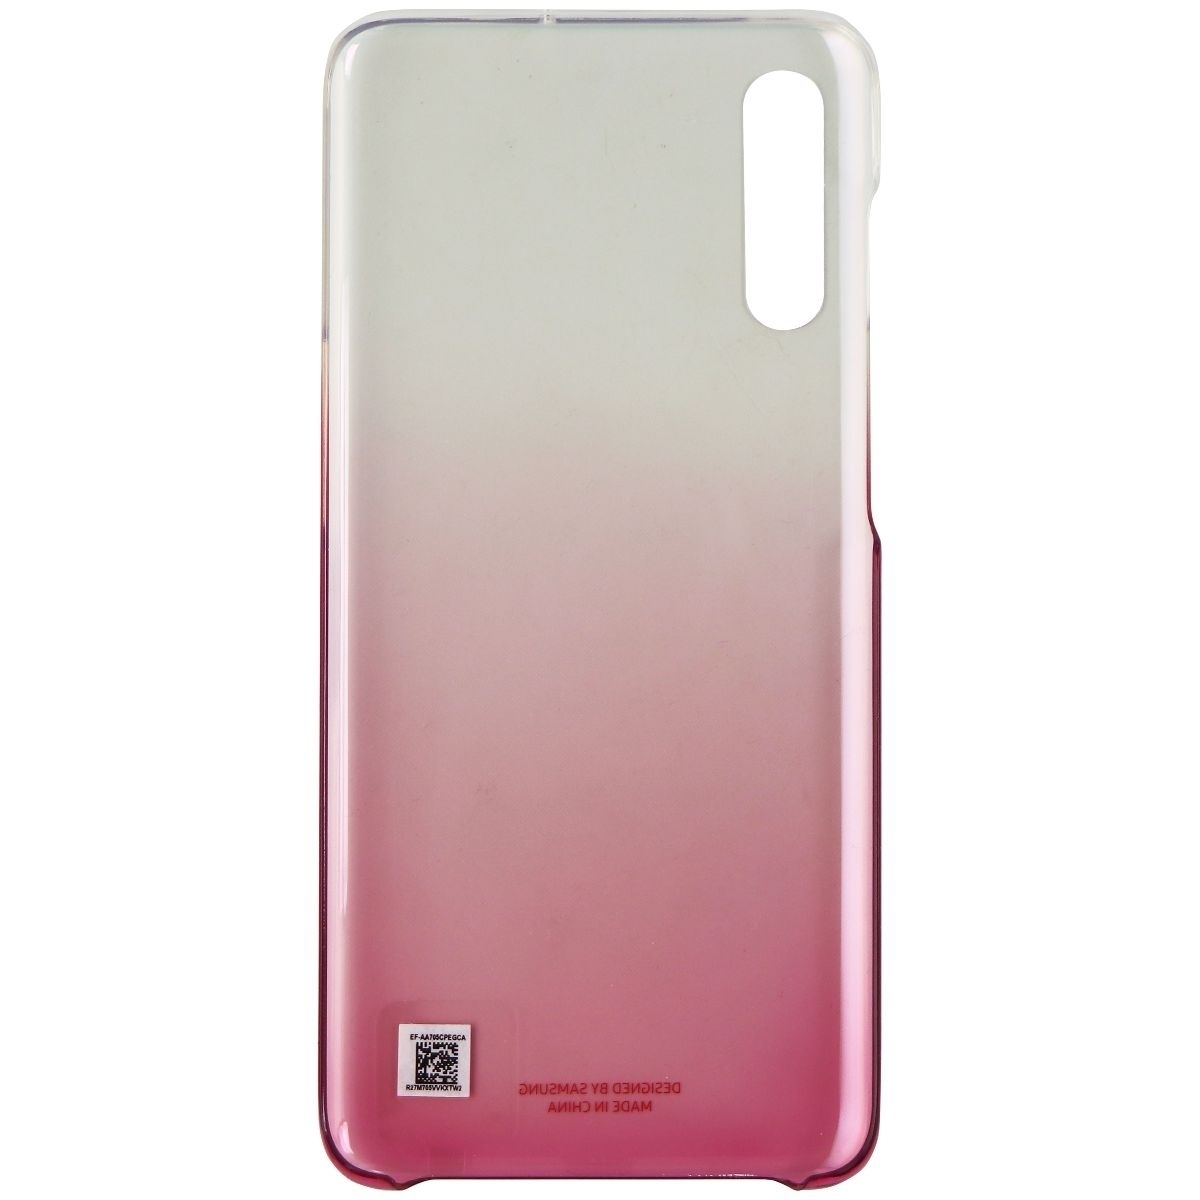 Samsung Gradation Ultra-Thin Cover Case For Samsung Galaxy A70 - Gradient Pink